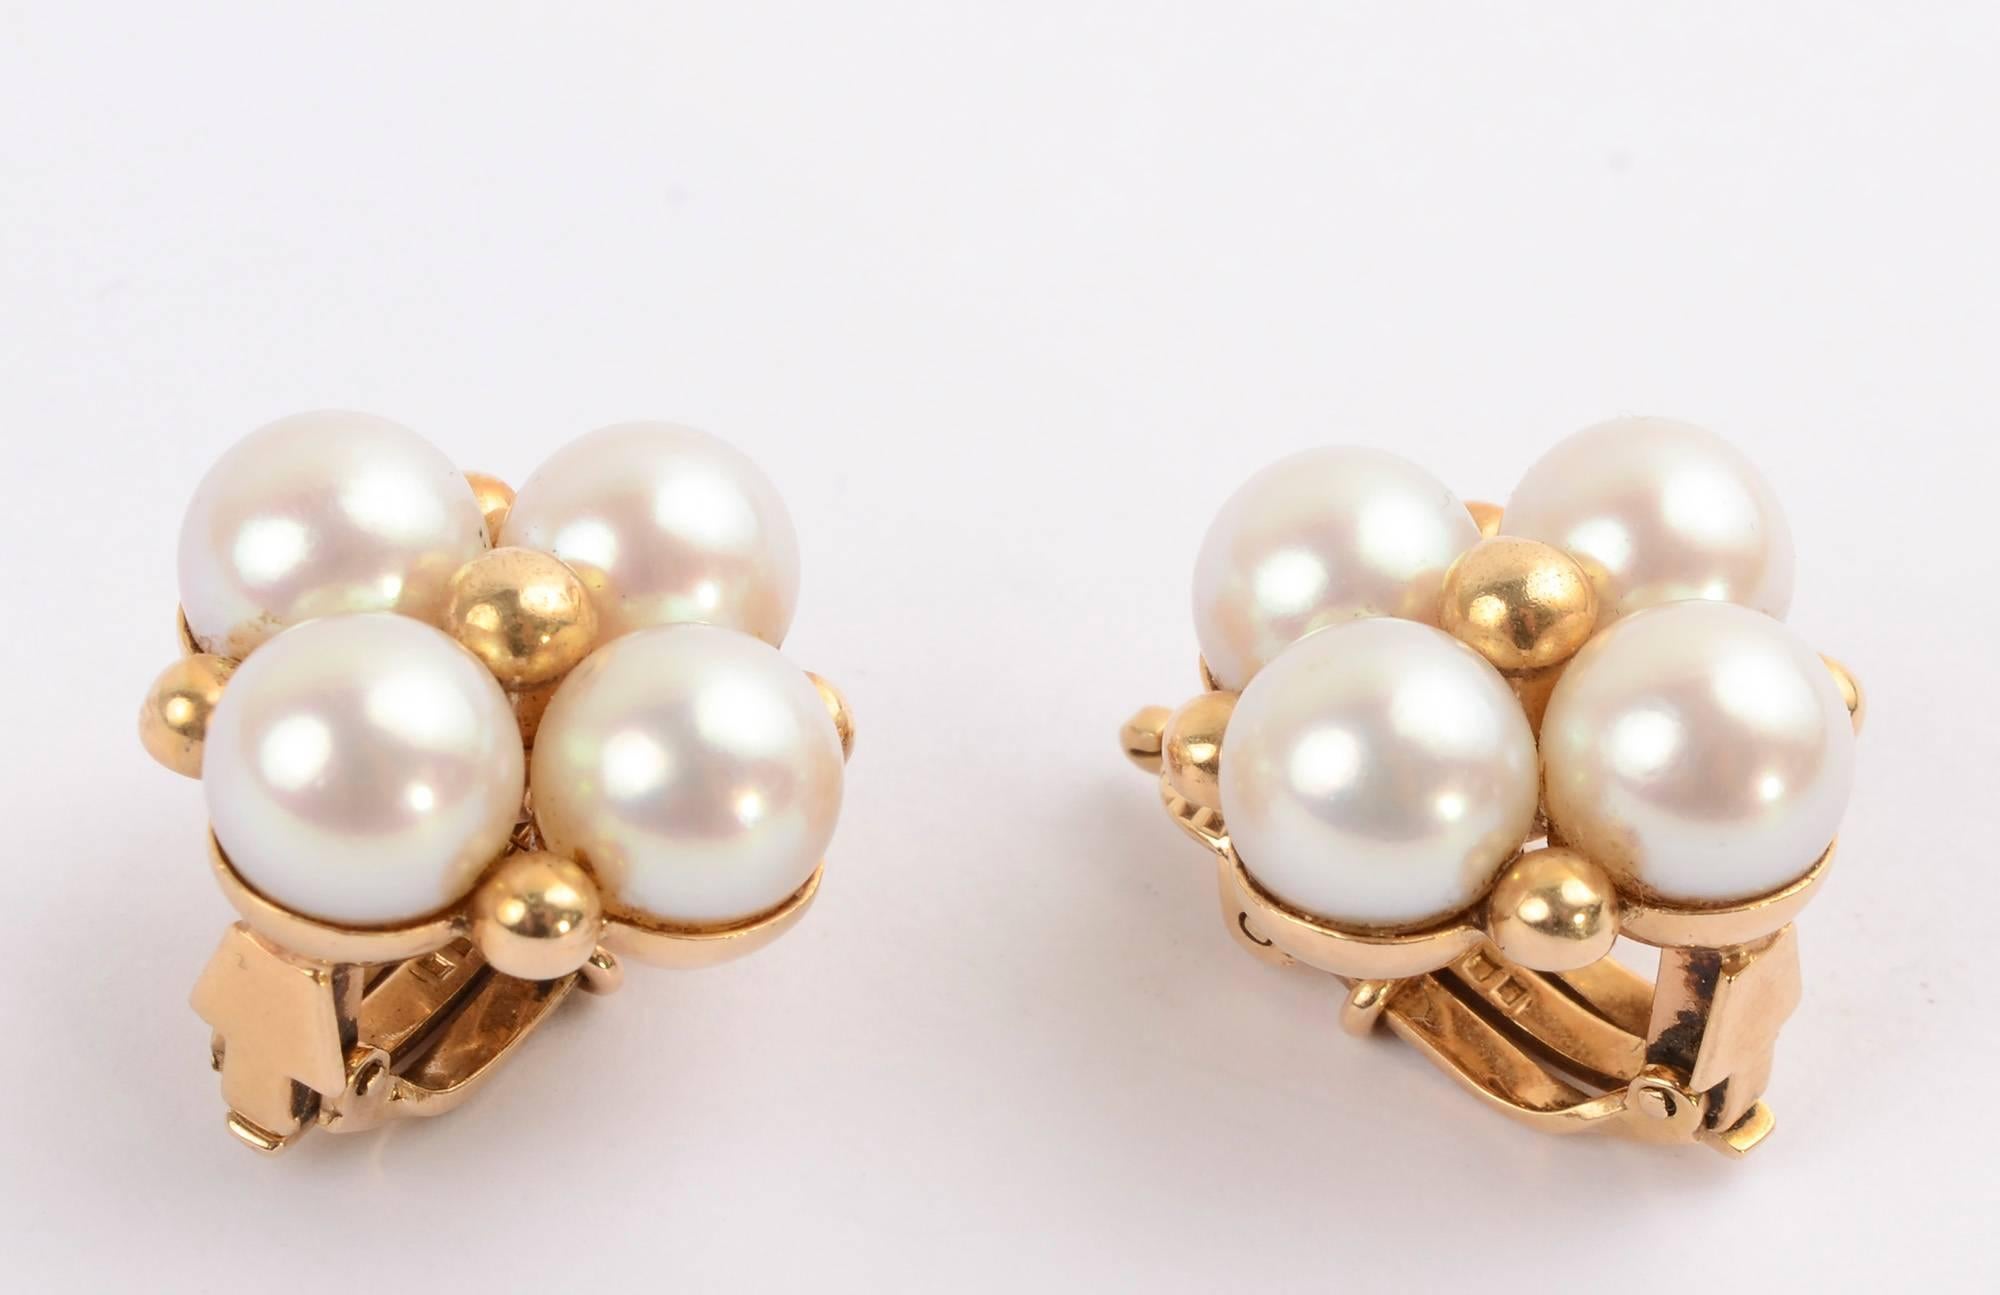 Tailored earrings by Wordley, Alsopp and Bliss of a cluster of four cultured pearls, each about 7.5 mm in size. The center and each corner has a small gold ball. The earrings measure 3/4 inch in diameter and weigh 15 grams. Clip backs can be